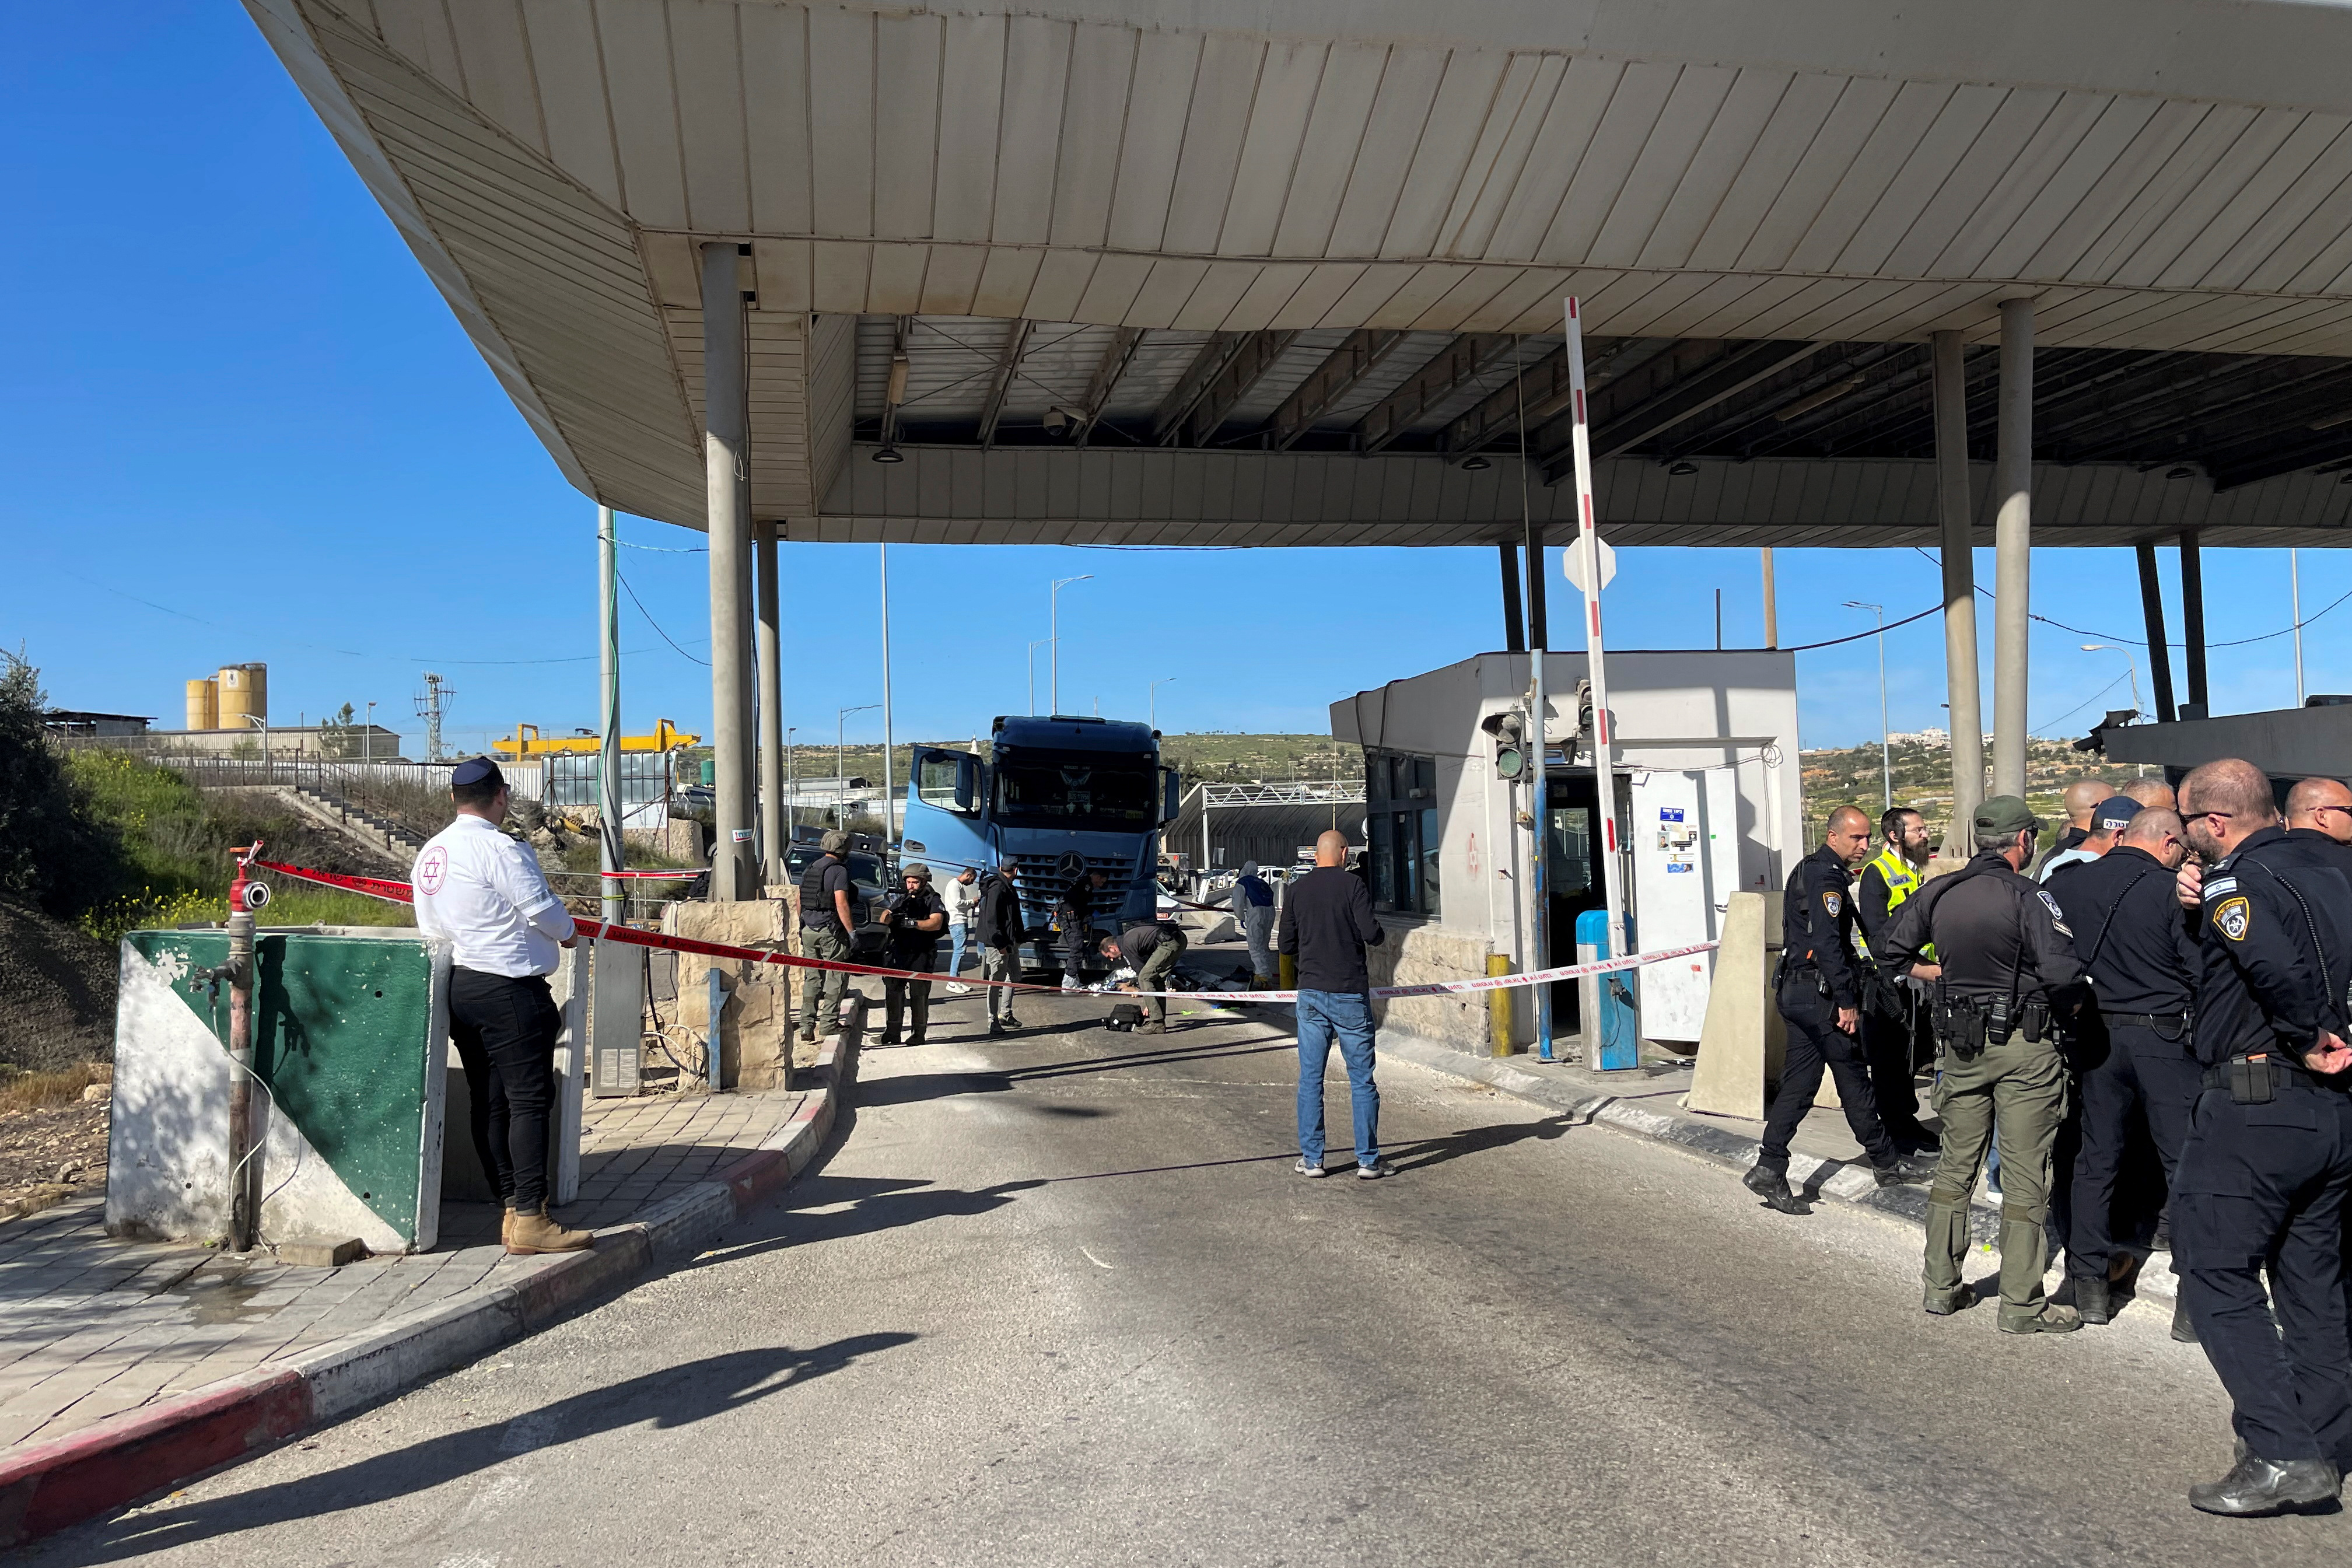 Israeli forces work at the scene of a suspected attack at a checkpoint outside of Jerusalem, in the Israeli-occupied West Bank, on March 13.